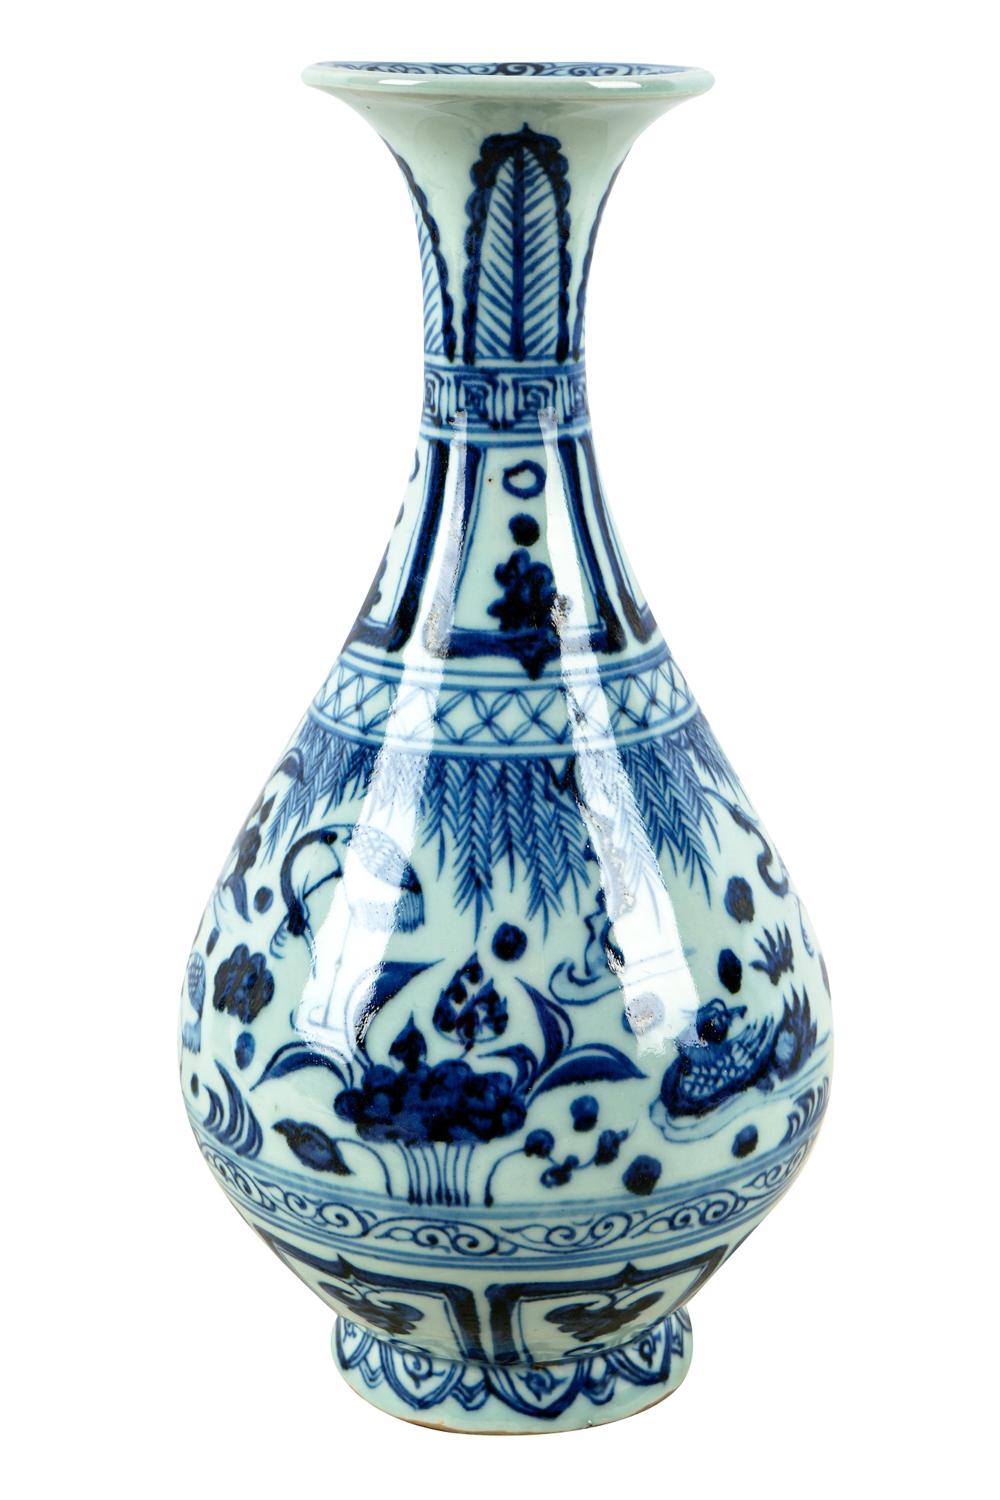 CHINESE PEAR SHAPED BLUE WHITE 332532